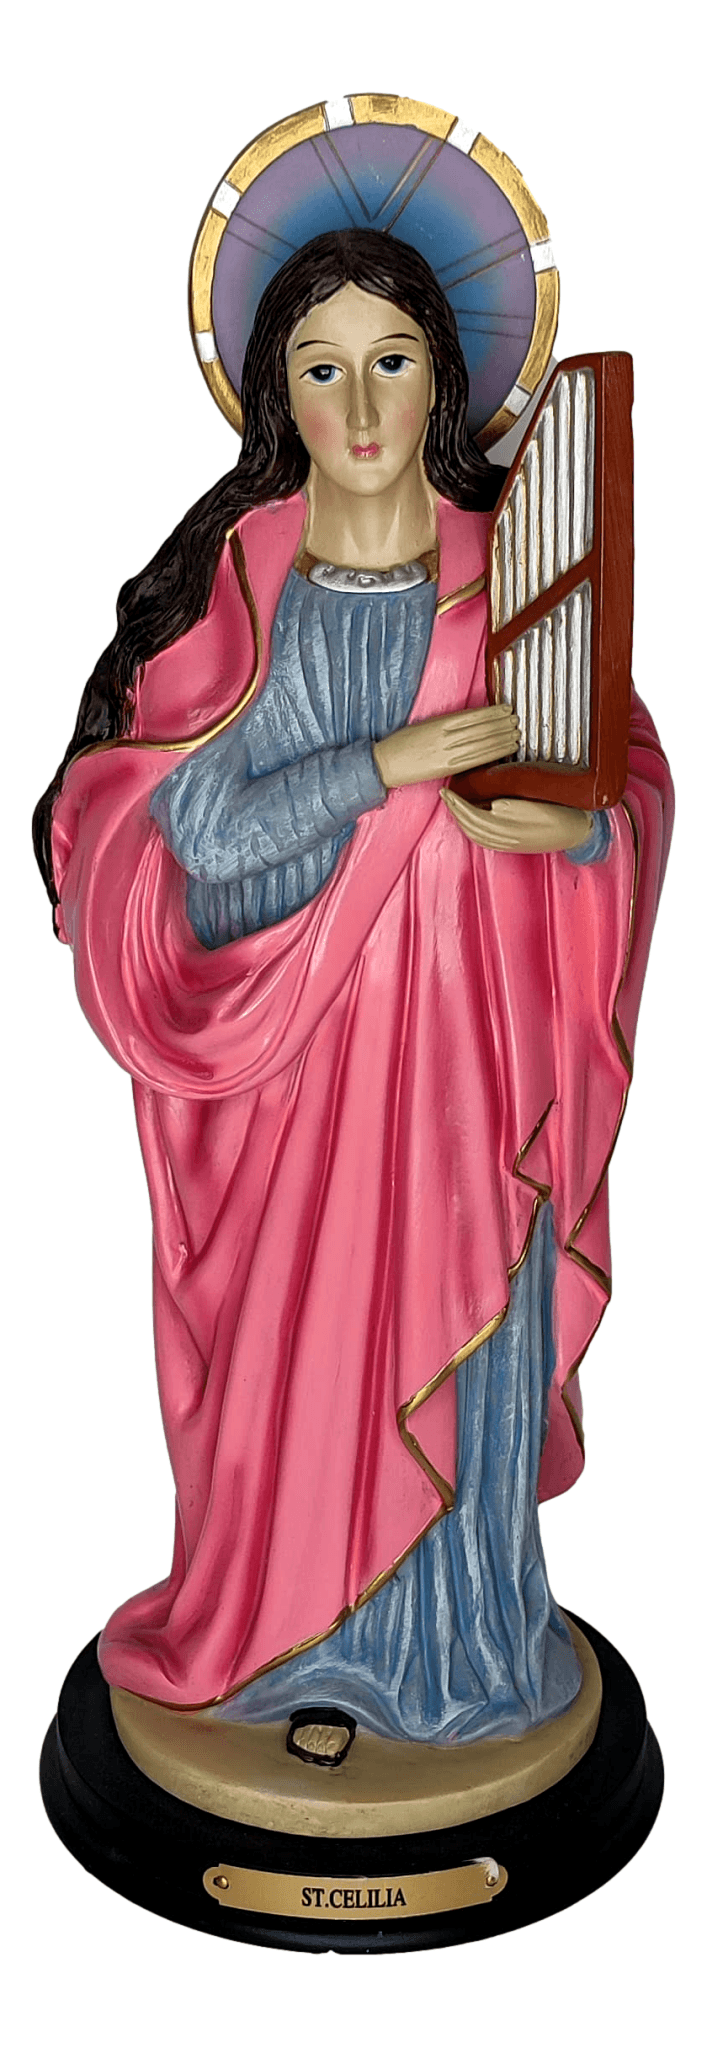 Statue Saint Cecilia Handcrafted By Skilled Mexican Artisans - Ysleta Mission Gift Shop- VOTED El Paso's Best Gift Shop